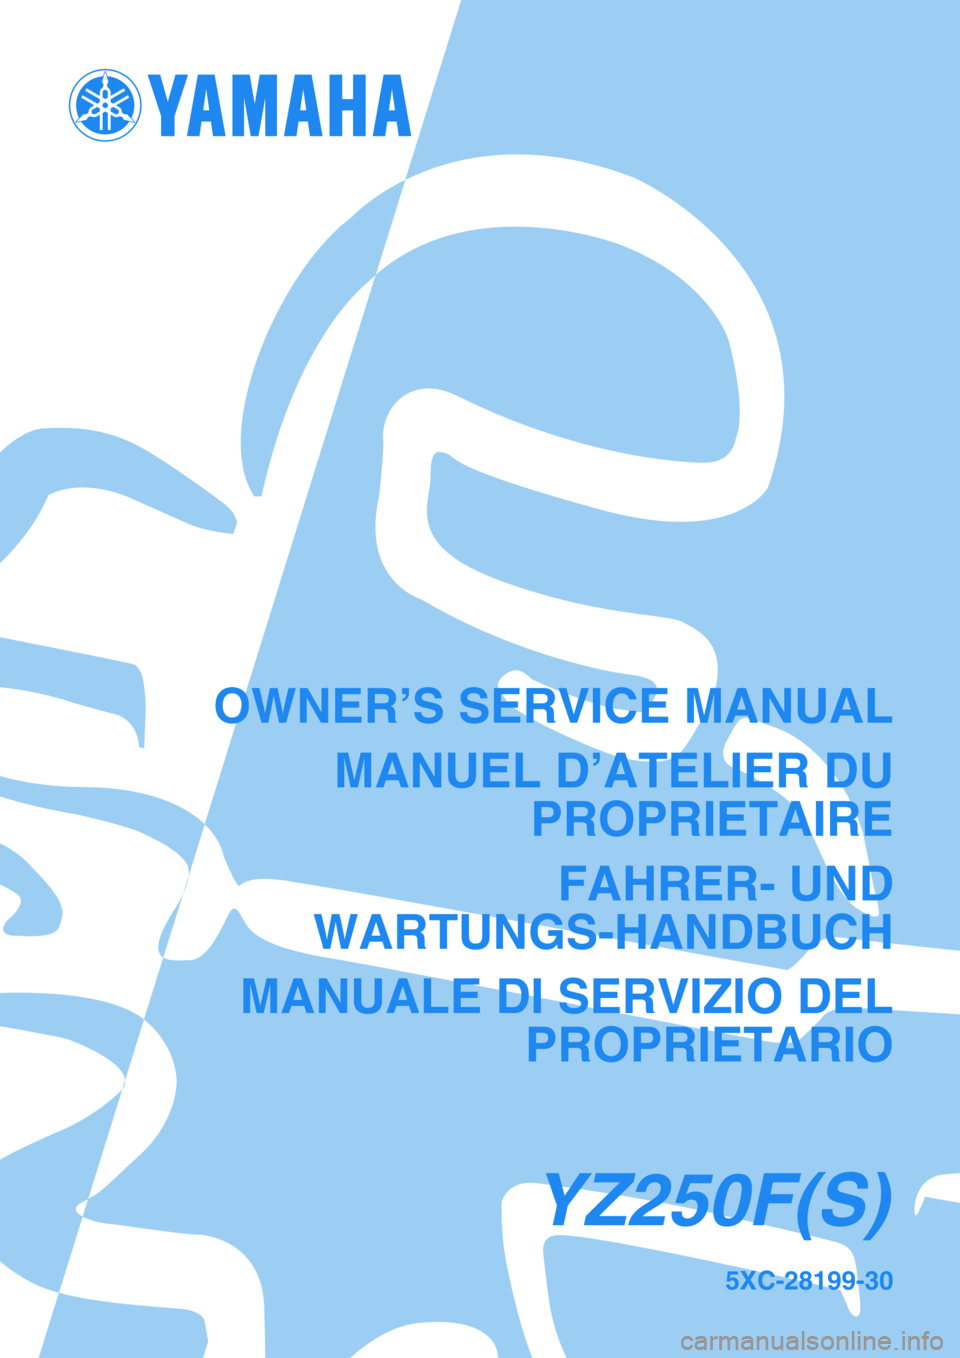 YAMAHA YZ250F 2004  Notices Demploi (in French) 5XC-28199-30
YZ250F(S)
OWNER’S SERVICE MANUAL
MANUEL D’ATELIER DU
PROPRIETAIRE
FAHRER- UND
WARTUNGS-HANDBUCH
MANUALE DI SERVIZIO DEL
PROPRIETARIO 